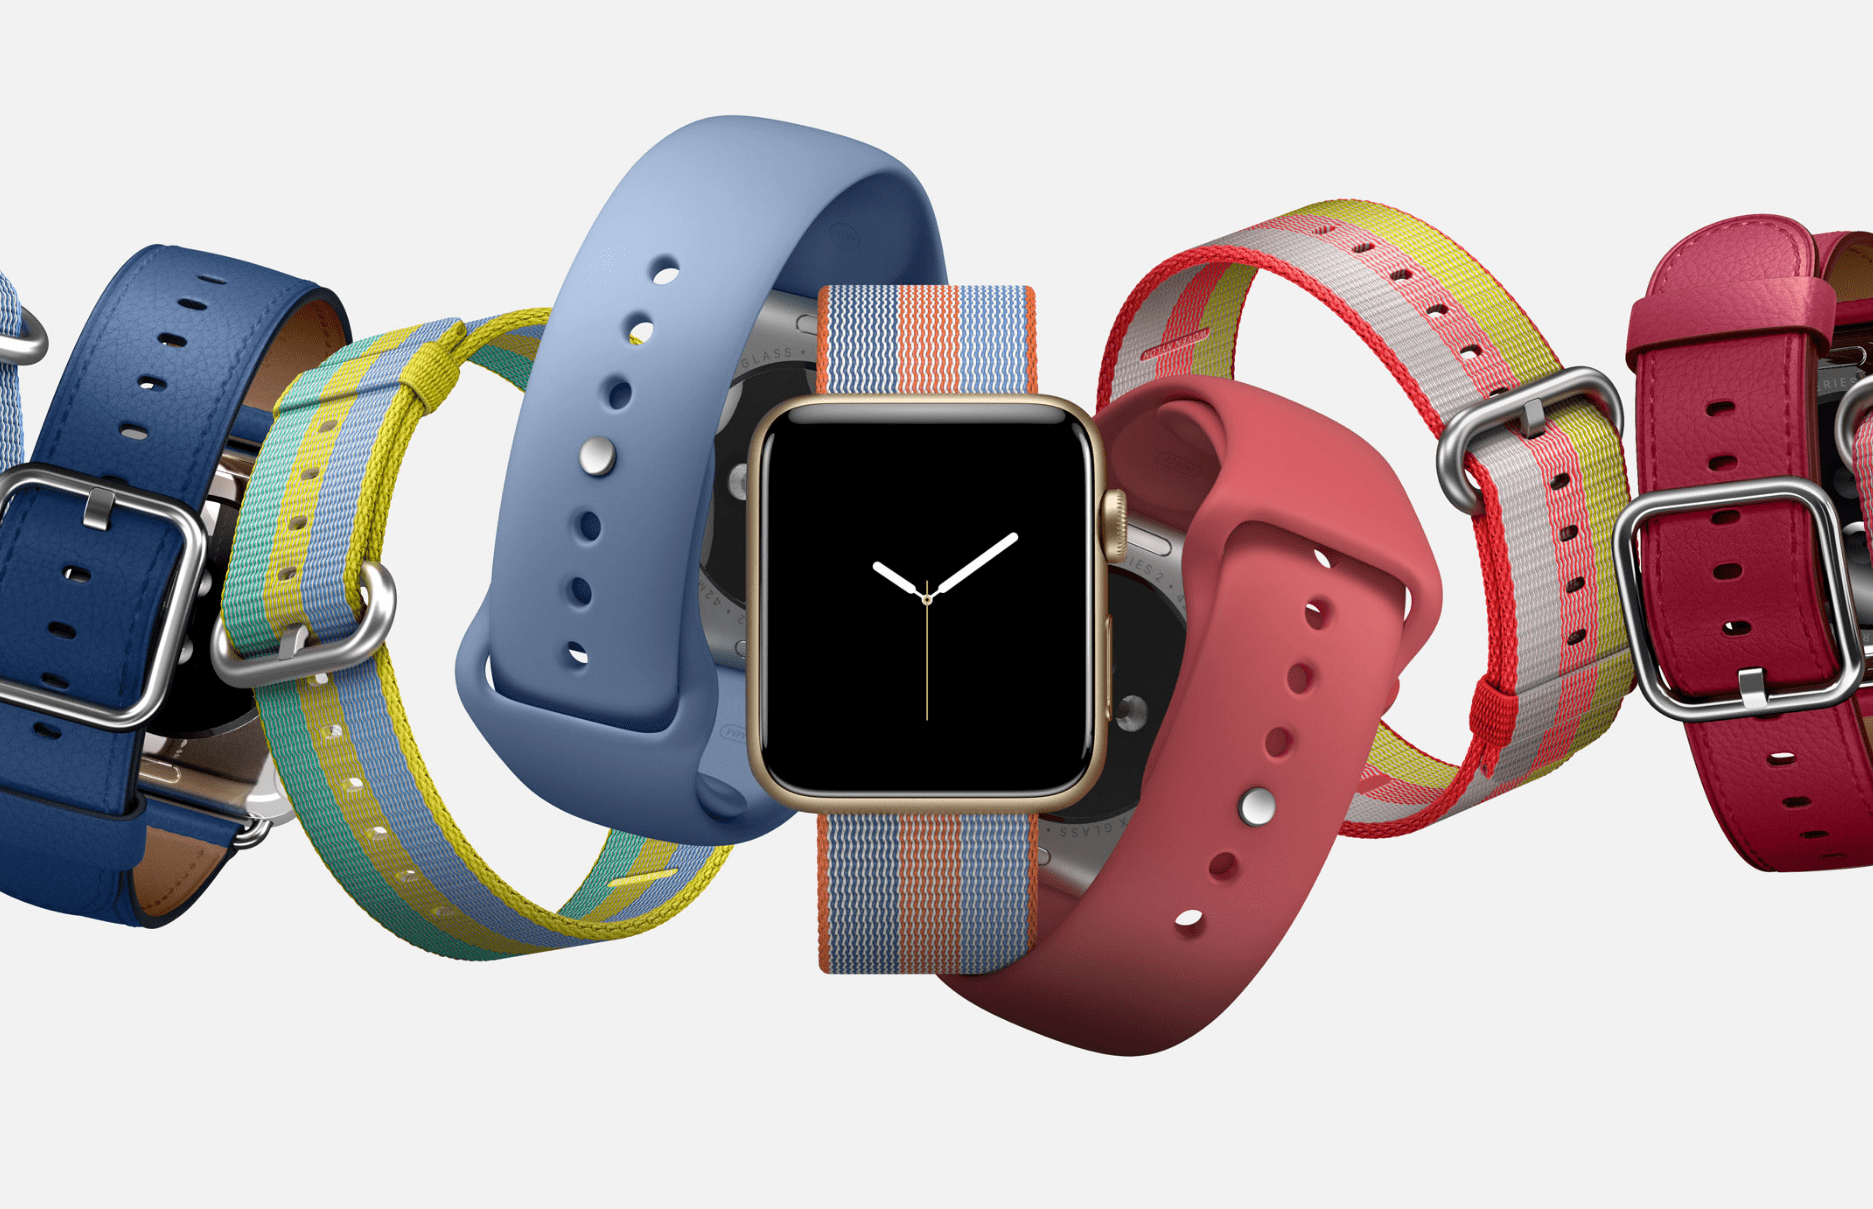 Pressure mounts on Apple Watch Series 3 as shipments fall